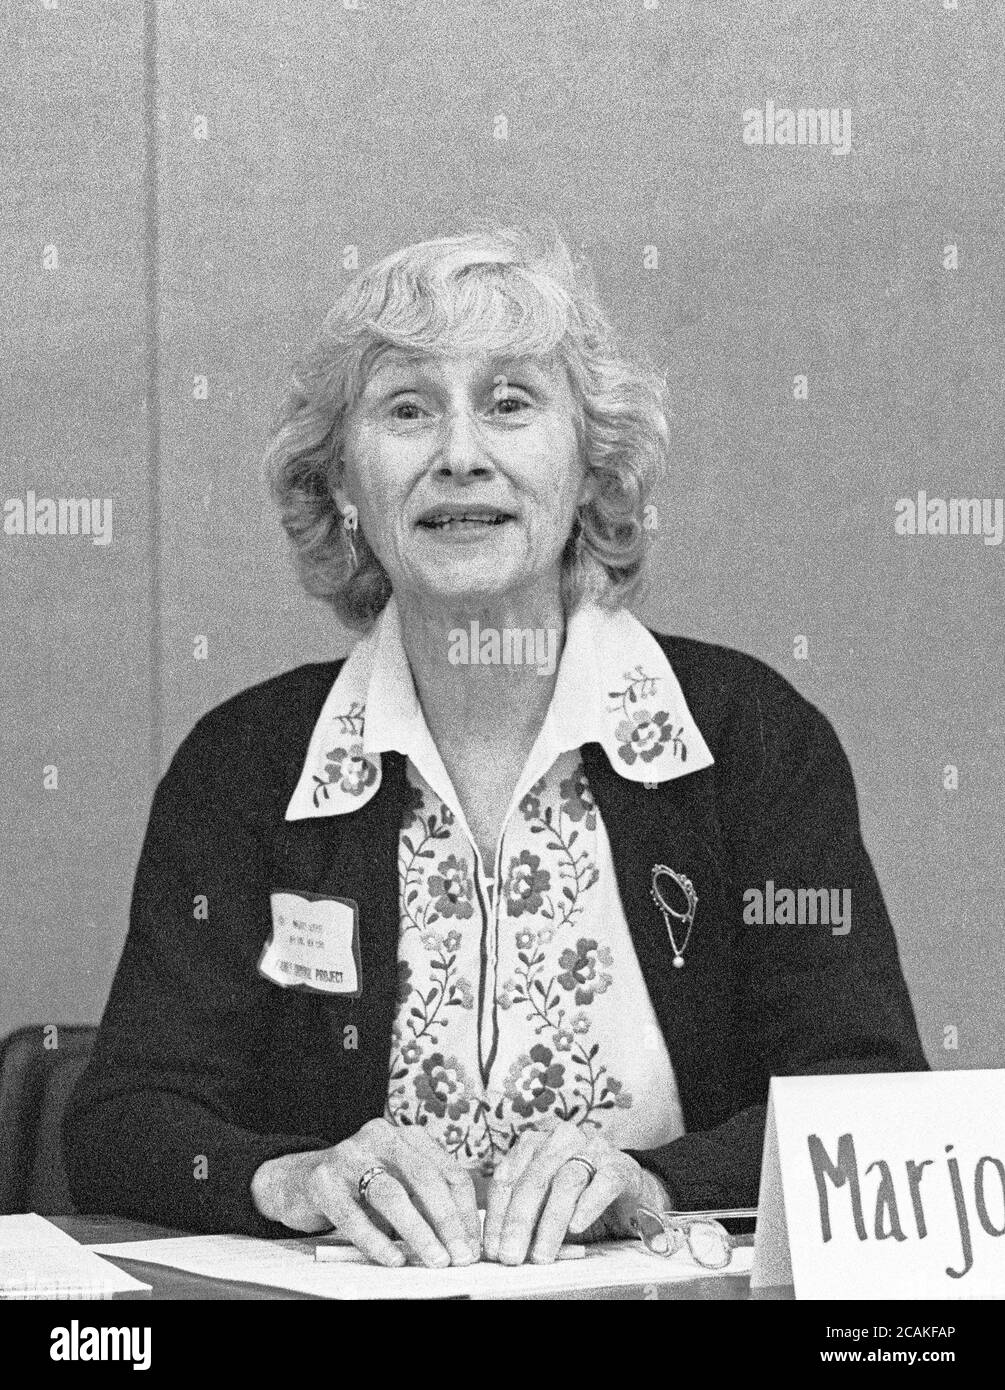 Marjorie Guthrie, wife of Woody Guthrie, mother of Arlo Guthrie,  at a seminar about health in San Francisco Stock Photo